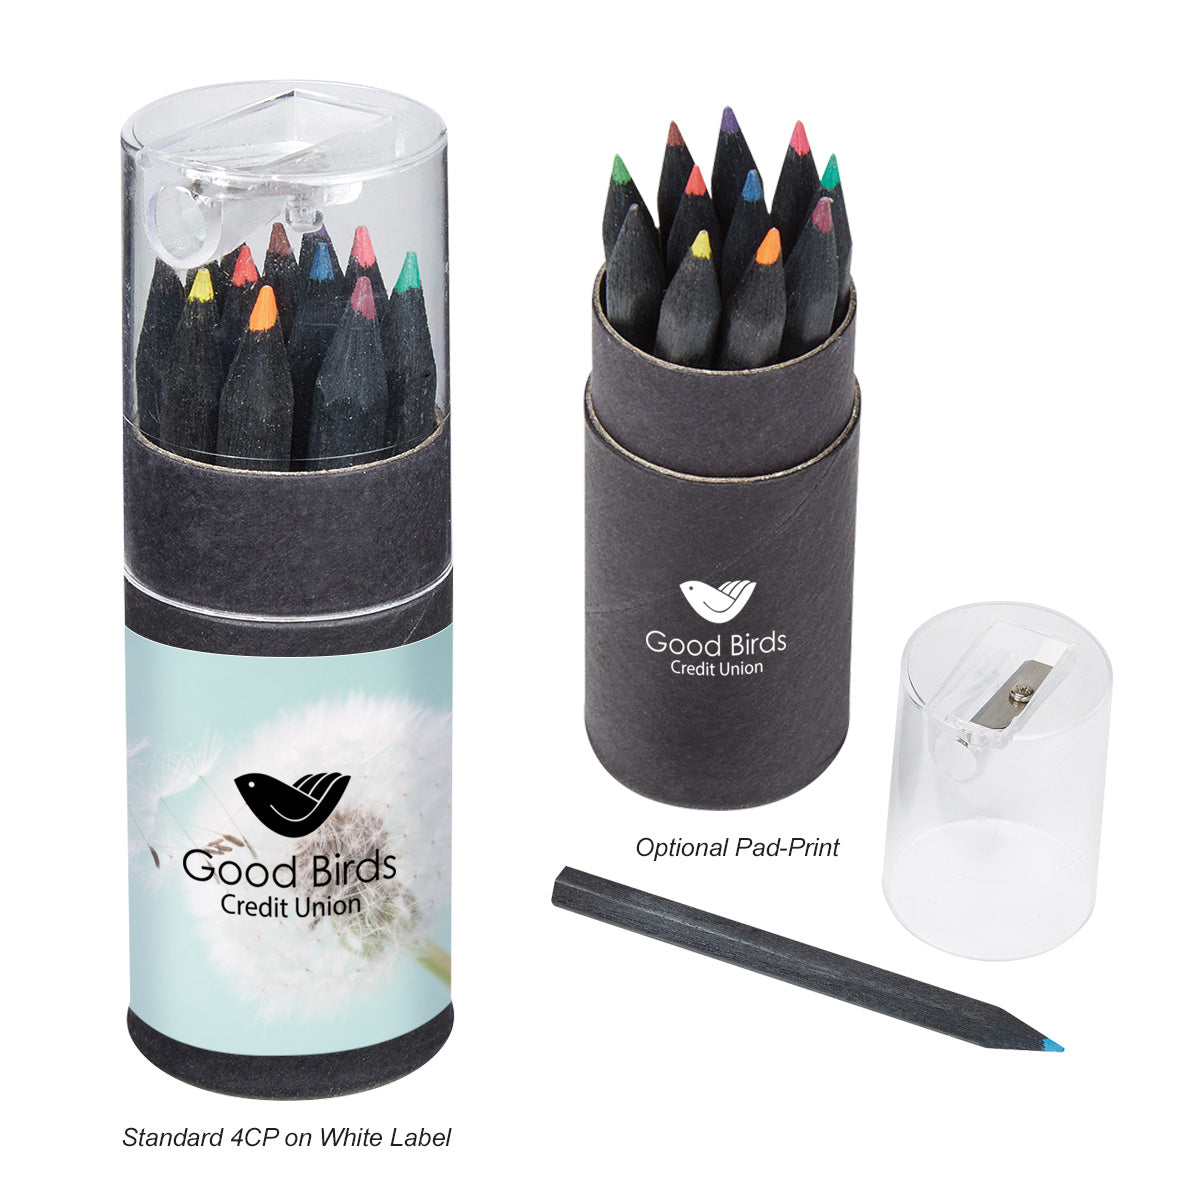 Blackwood 12-Piece Coloured Pencil Set In Tube With Sharpener